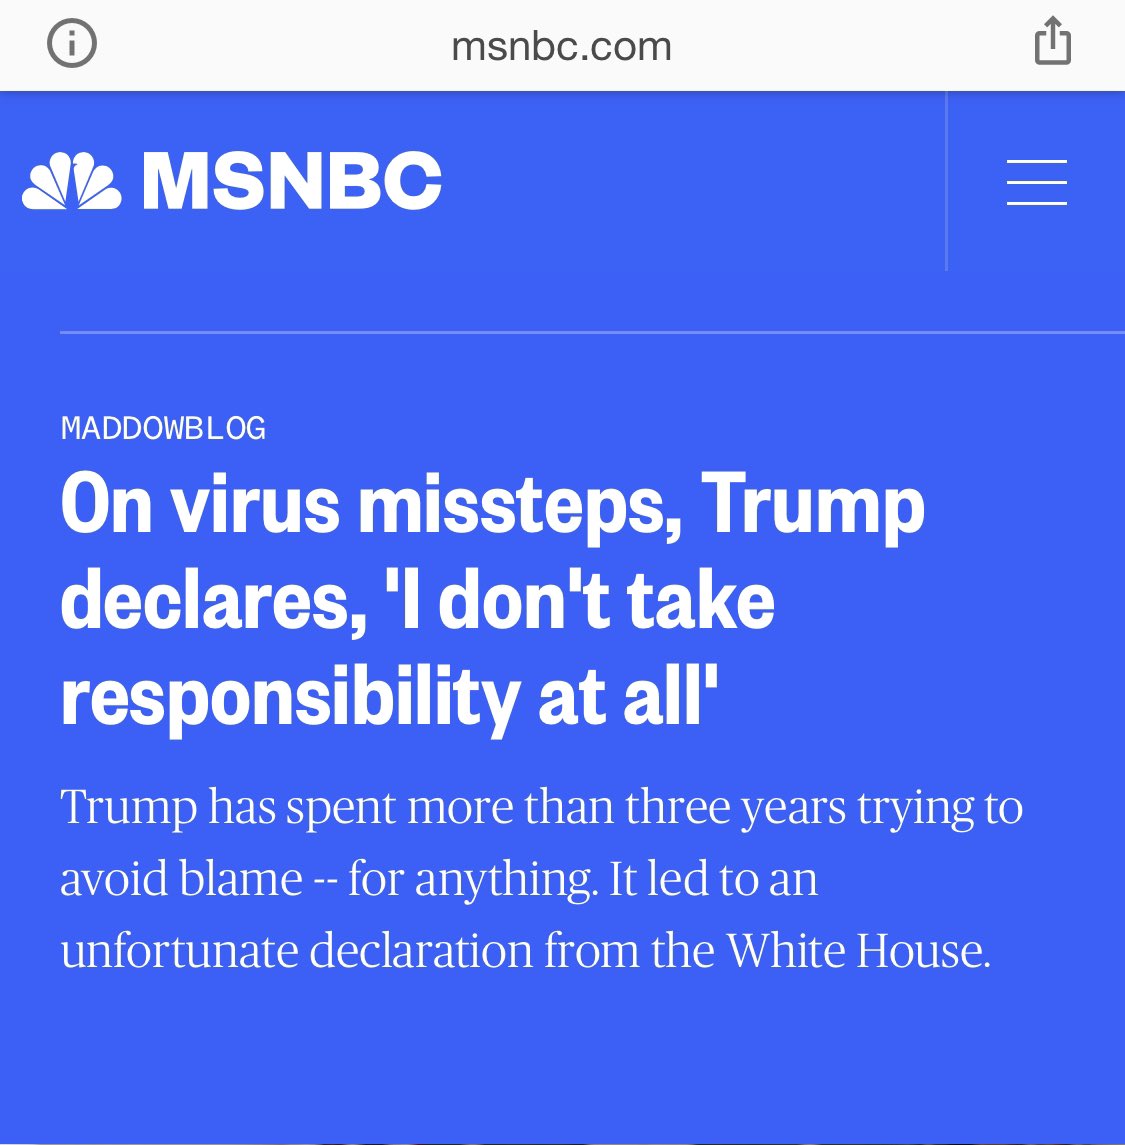 7. "Lack of remorse, as indicated by being indifferent to or rationalizing having hurt, mistreated, or stolen from another.” https://www.msnbc.com/rachel-maddow-show/virus-missteps-trump-declares-i-don-t-take-responsibility-all-n1160236 https://www.cnn.com/2018/05/15/politics/donald-trump-apologies/index.html